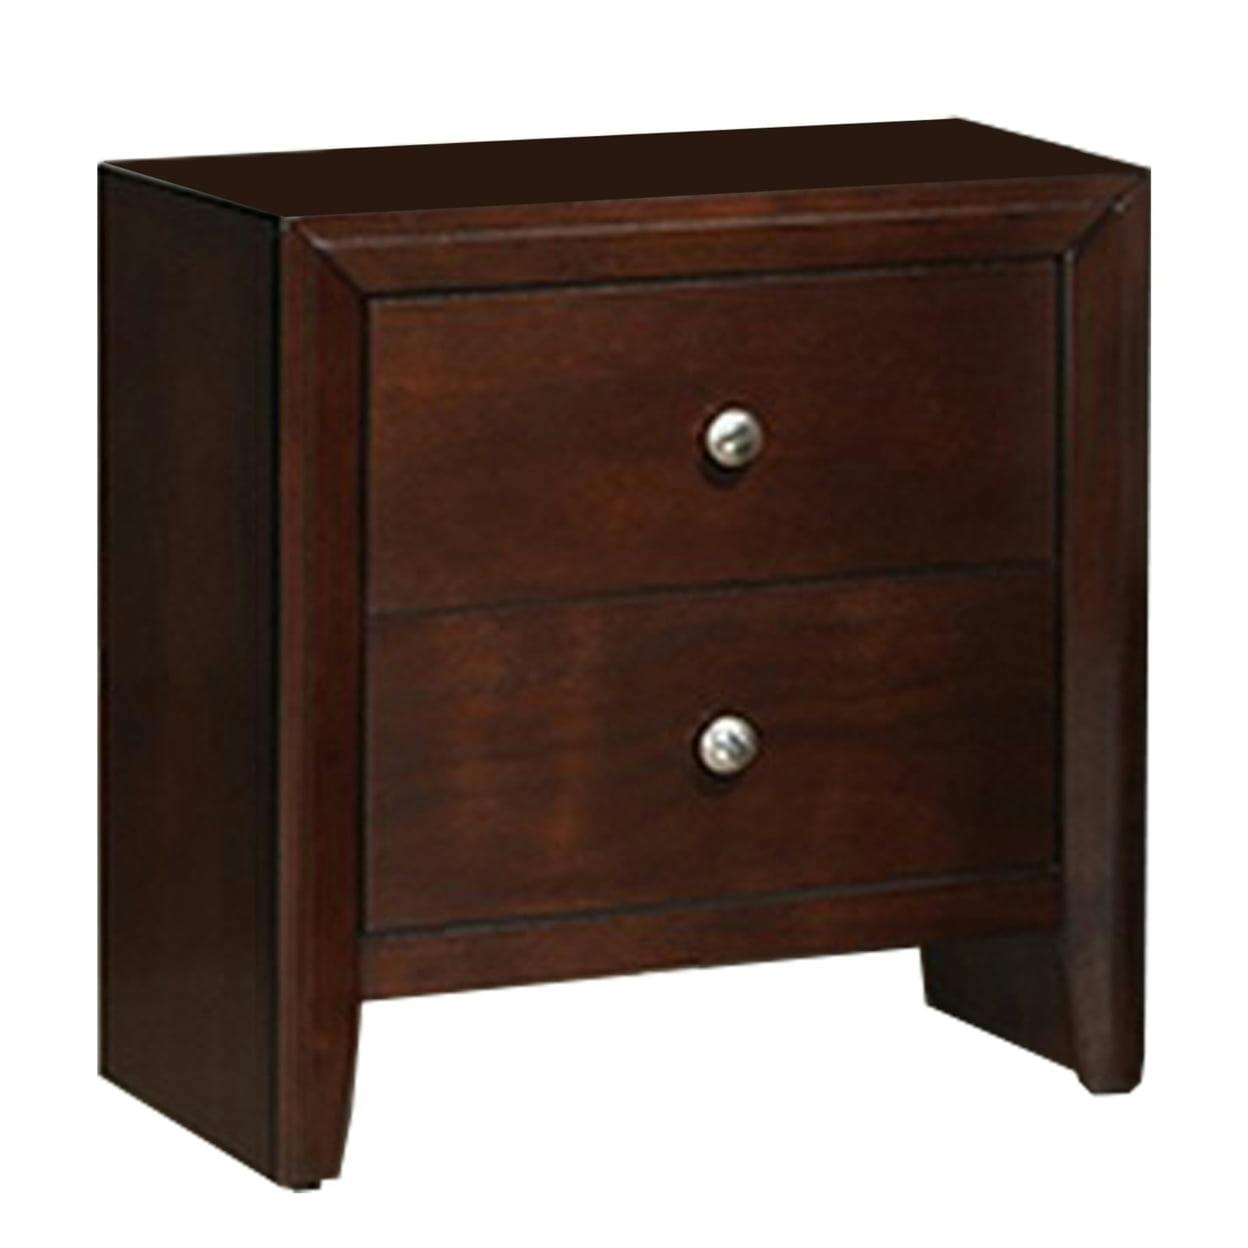 Transitional 24" Rubberwood Nightstand with Metal Pulls, Brown